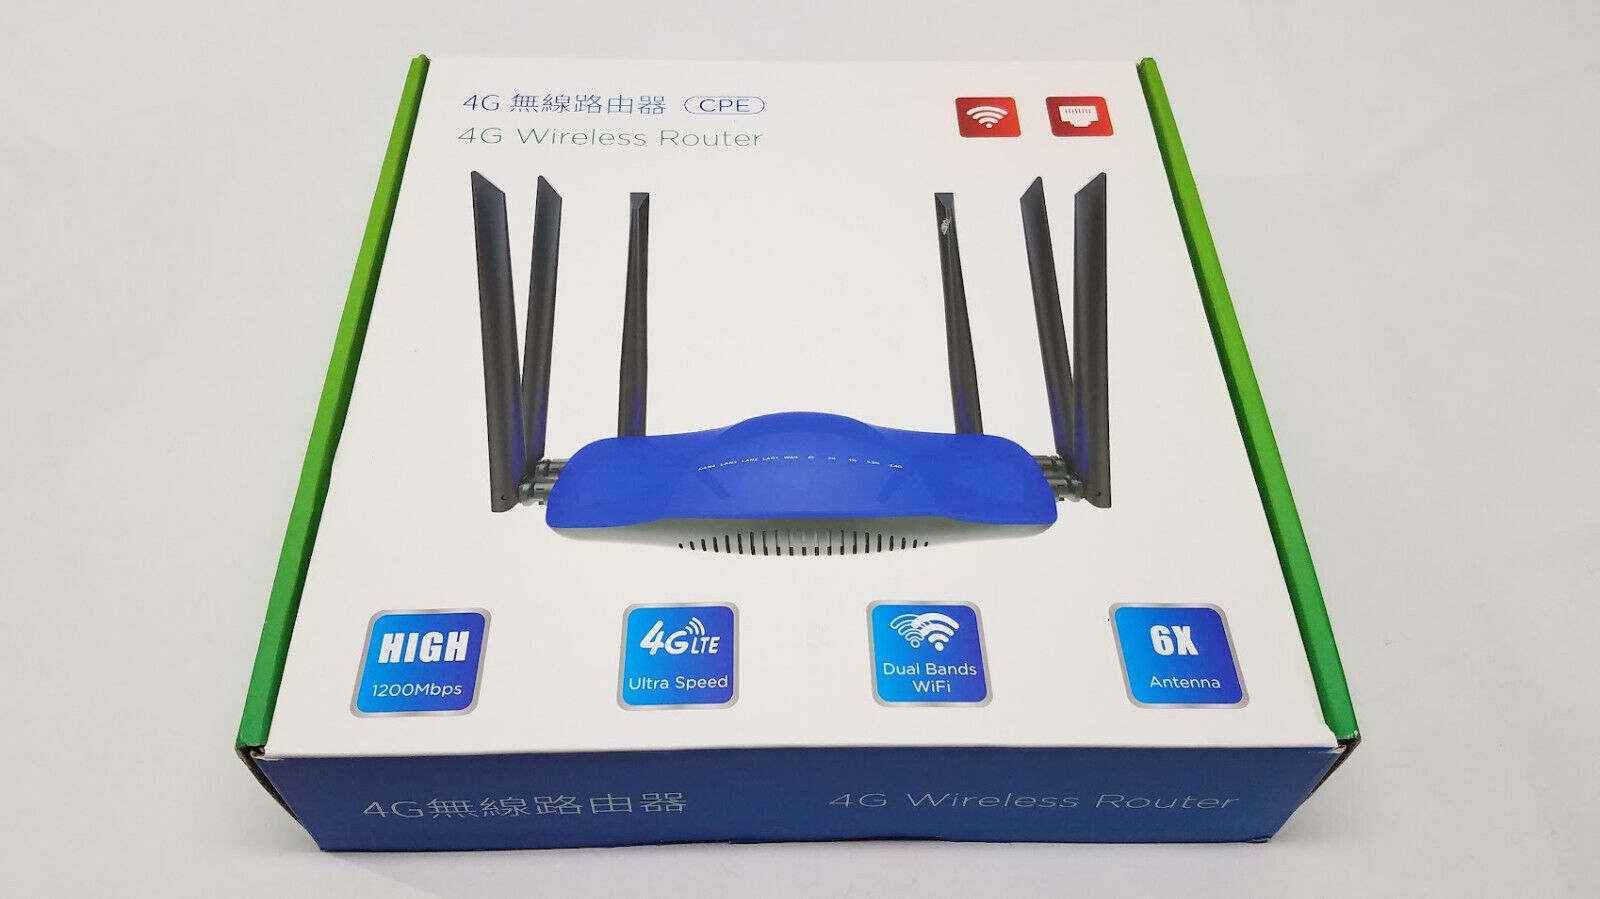 Dionlink 1200Mbps AC1200 Dual Band WIFI 4G Router with 6 Antennas Open Box